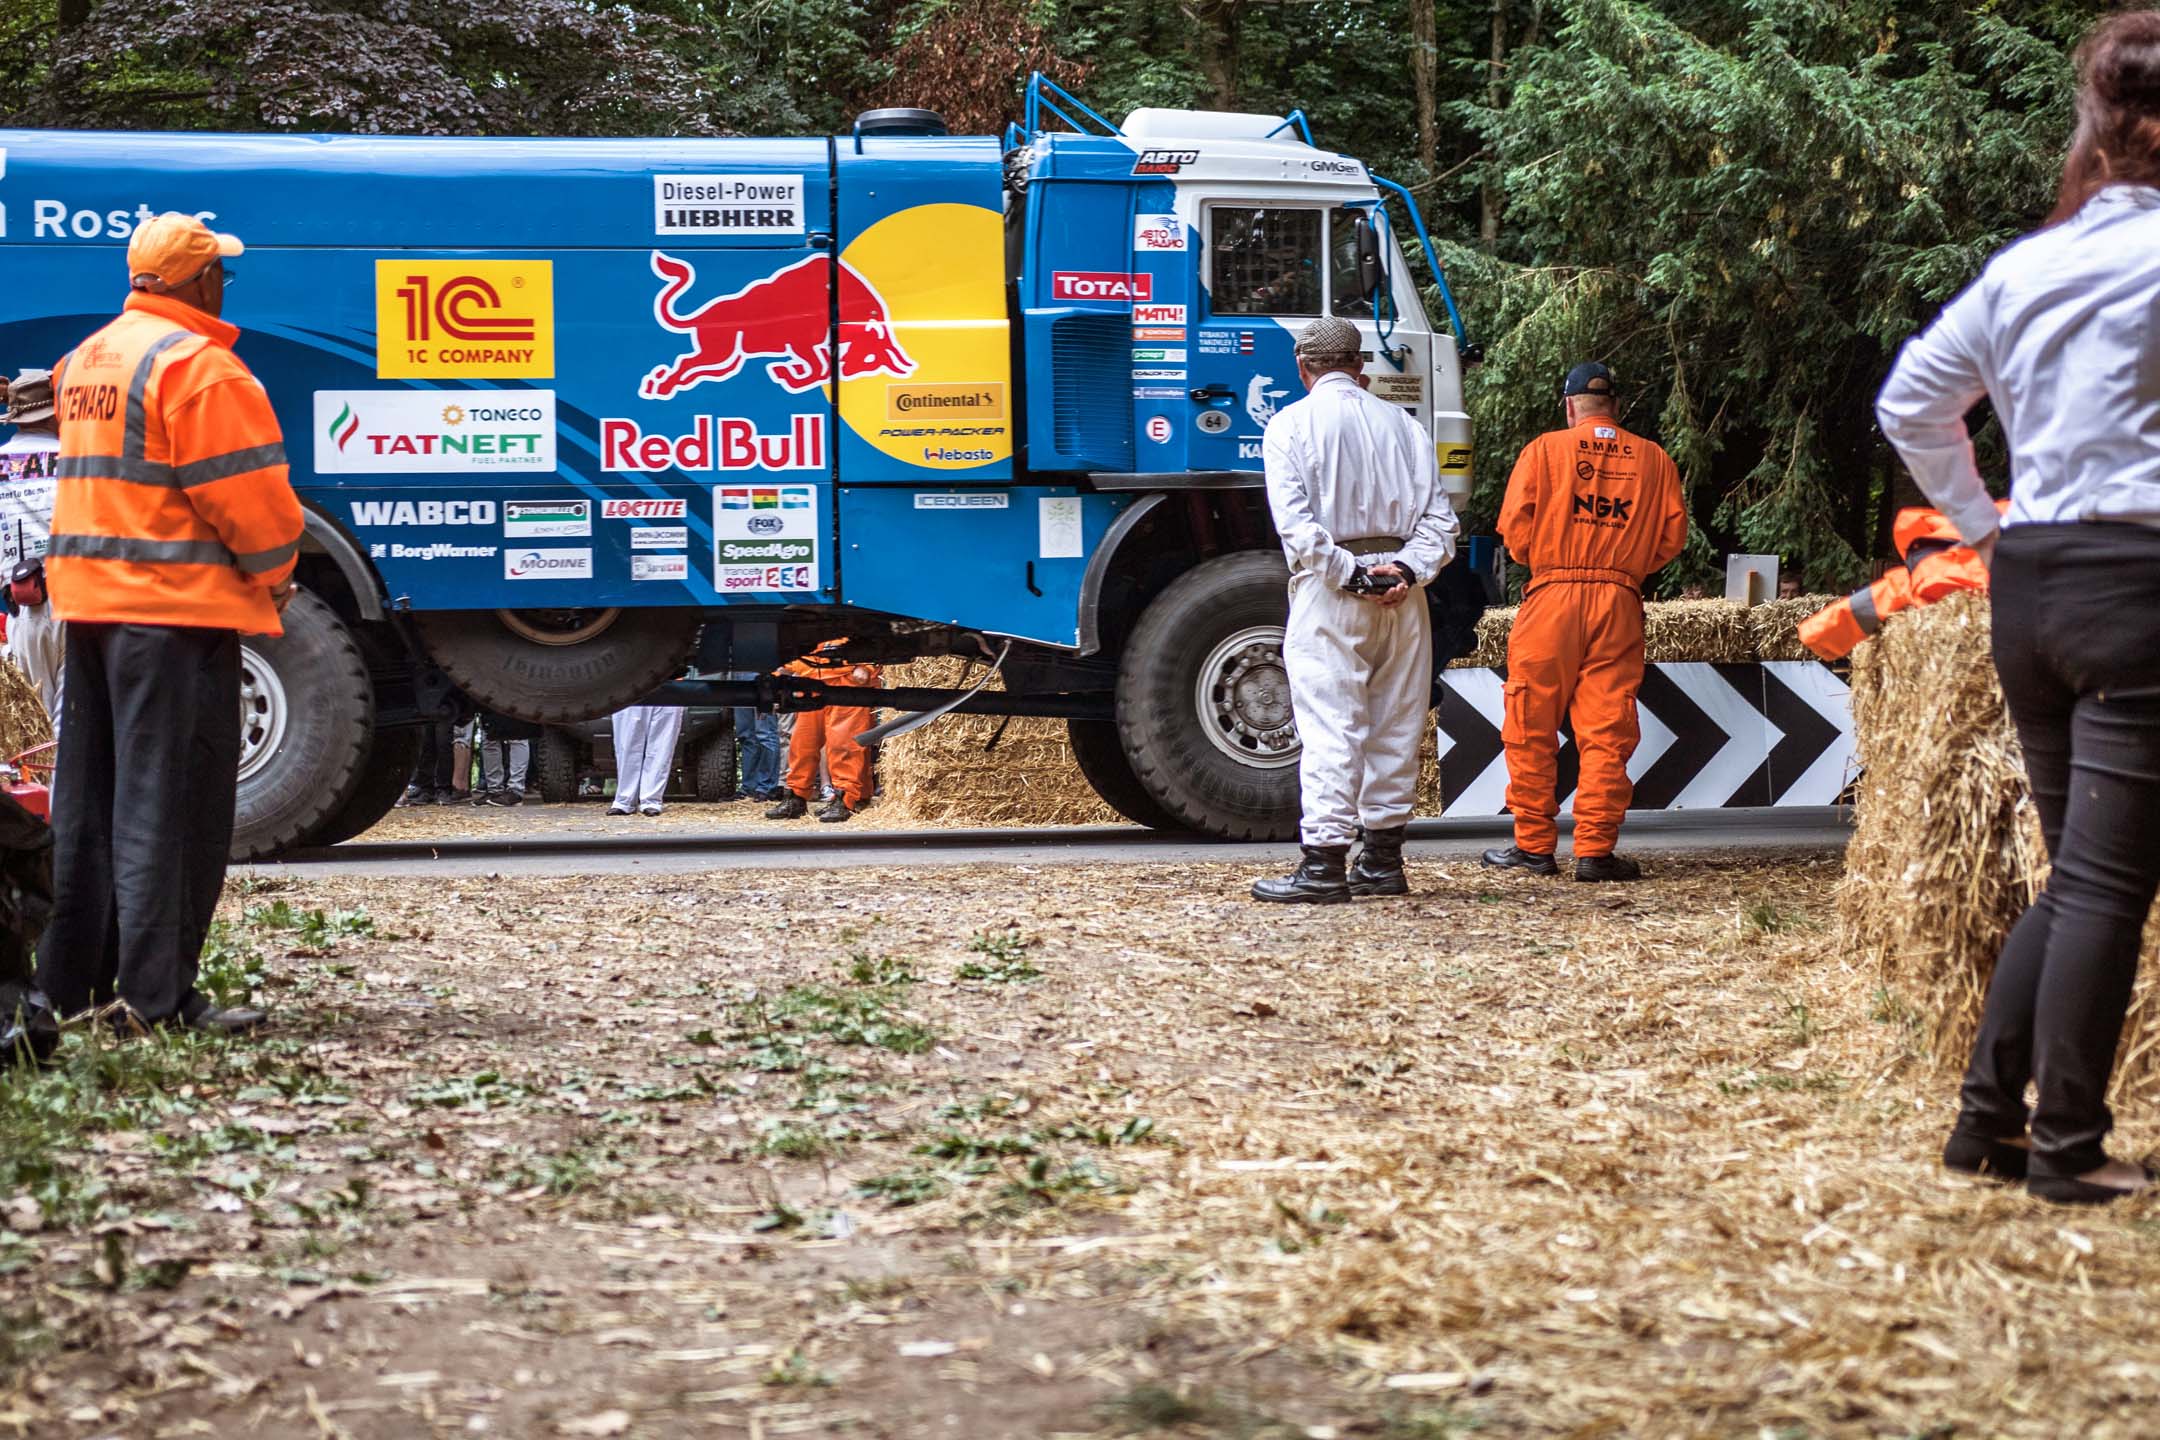 At the entry corner near the famously unforgiving flint wall, a leviathan appears. Intended for Dakar desert racing, this Red Bull-liveried truck appears in a whoosh of turbodiesel fury, then vanishes around the corner, chasing the finish line.